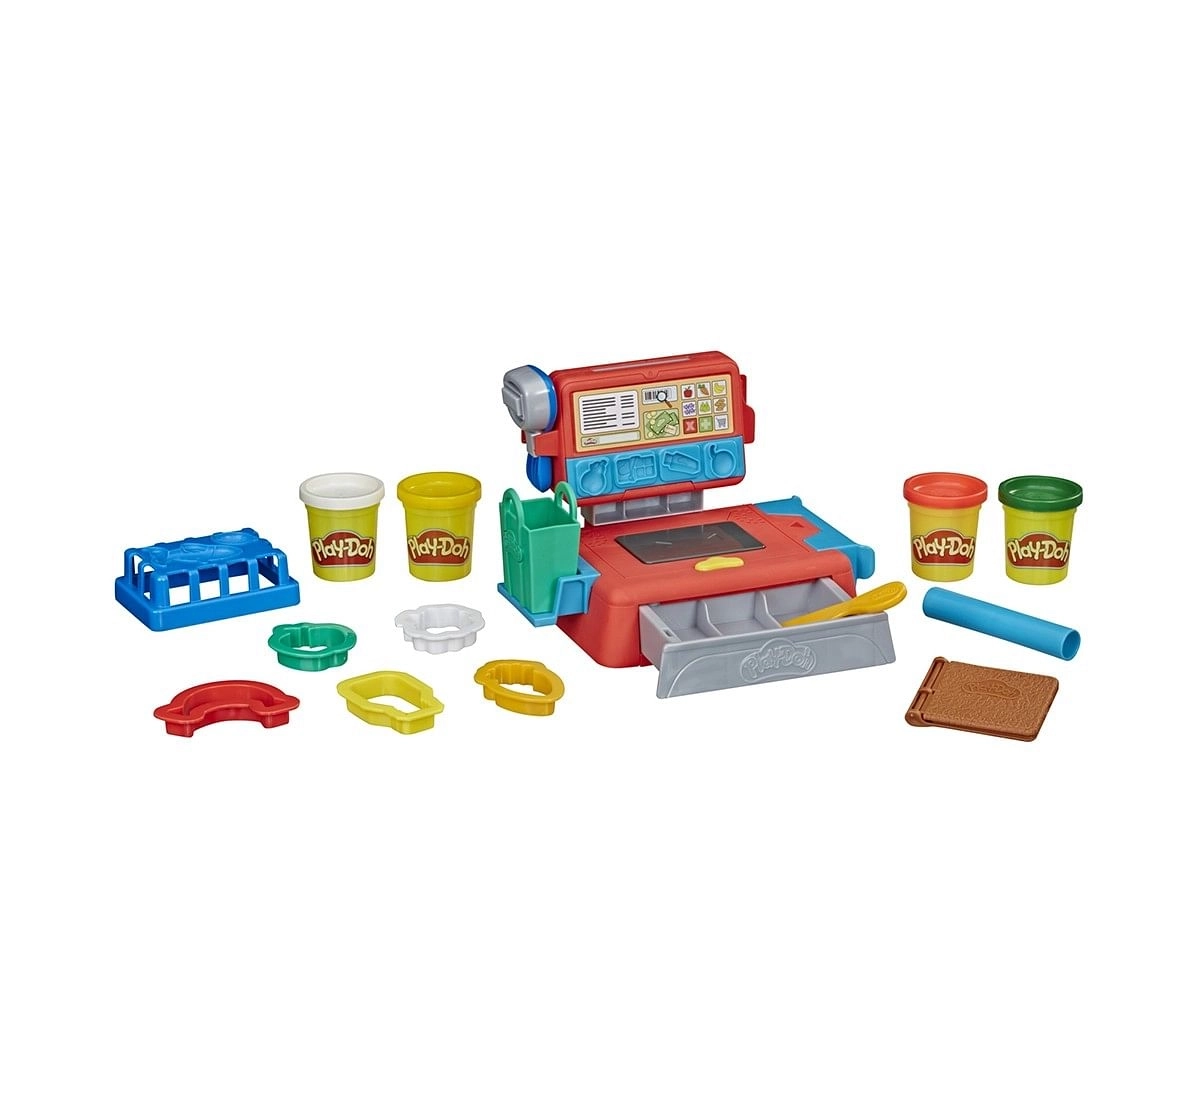 Play-Doh Cash Register Toy for Kids 3 Years and Up with Fun Sounds, Play Food Accessories, and 4 Non-Toxic Play-Doh Colors   Clay & Dough for Kids age 3Y+ 